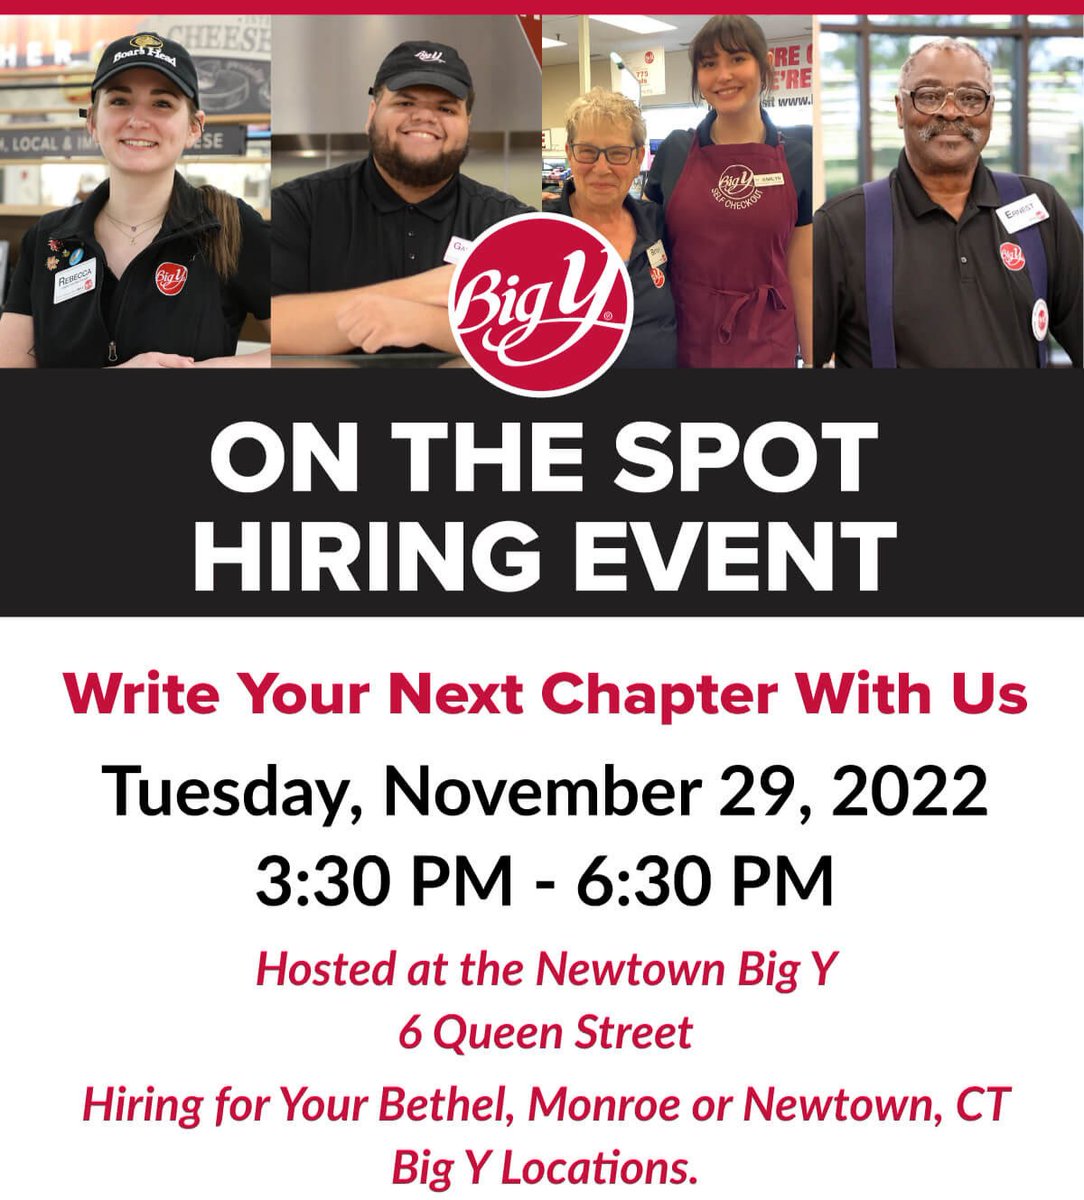 Big Y is #hiring for #BethelCT and #NewtownCT locations! Join them for their hiring fair on Tuesday, November 29th bit.ly/3Os0EnH #BigY #CTGroceryStores